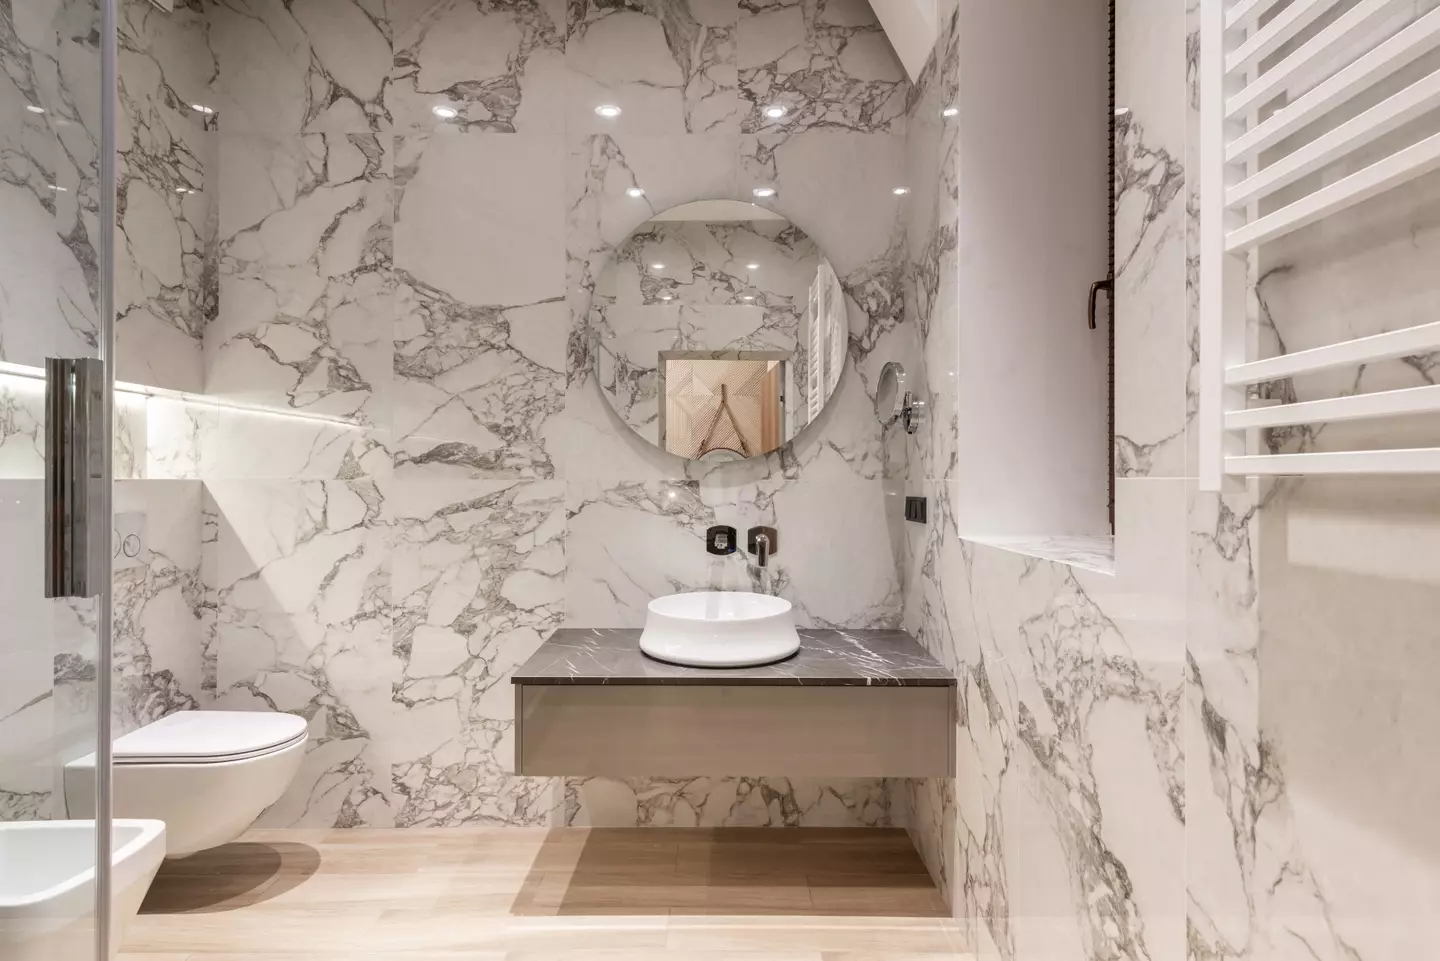 Your swish hotel bathroom could be hiding a secret.